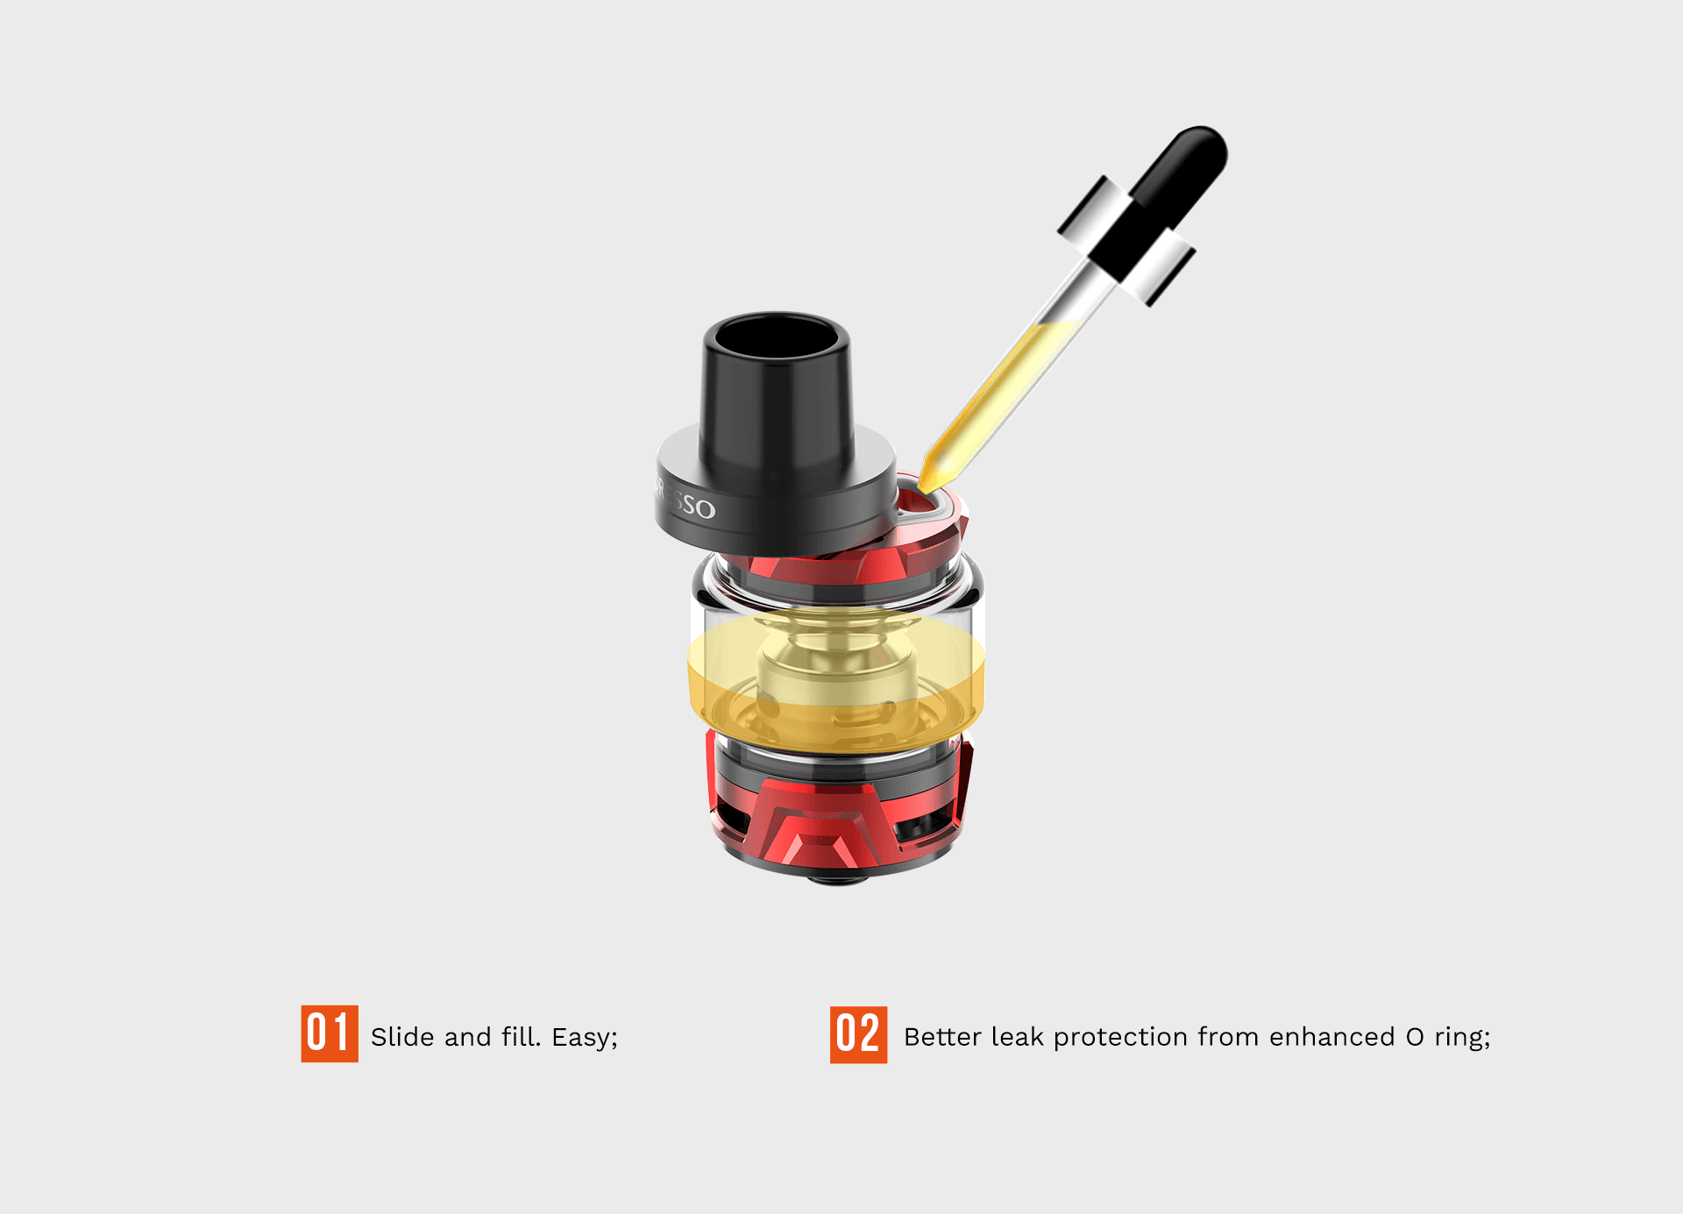 https://www.vaporesso.com/hs-fs/hubfs/img/Site/Products/luxe_2/luxe_8.png?t=1541399272776&width=1683&name=luxe_8.png